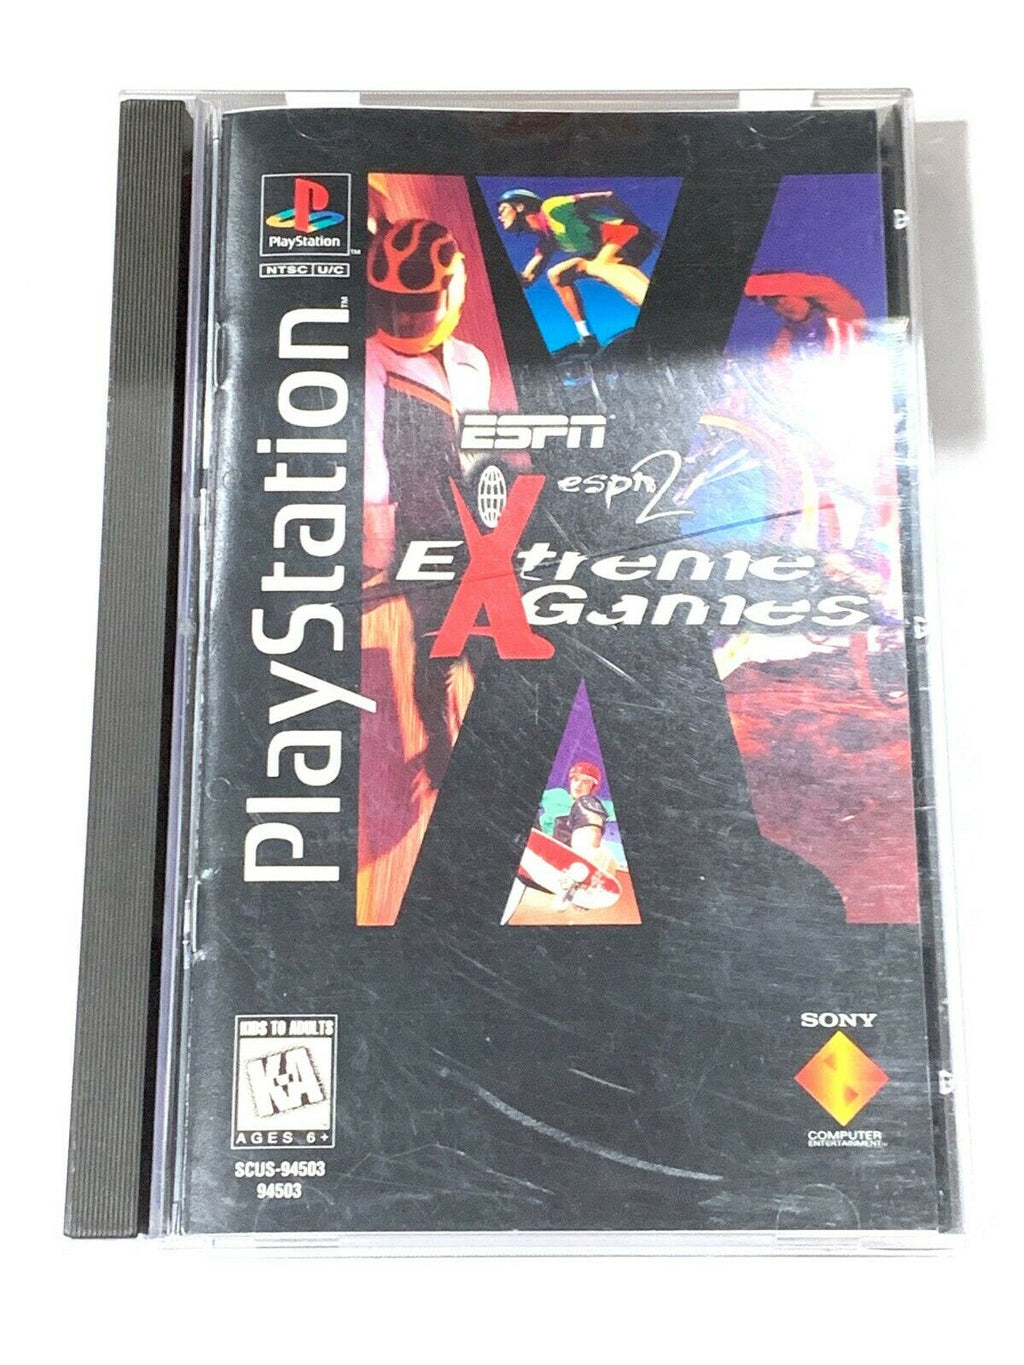 Espn Extreme Games Sony Playstation 1 Ps1 Long Box Complete Cib The Game Island